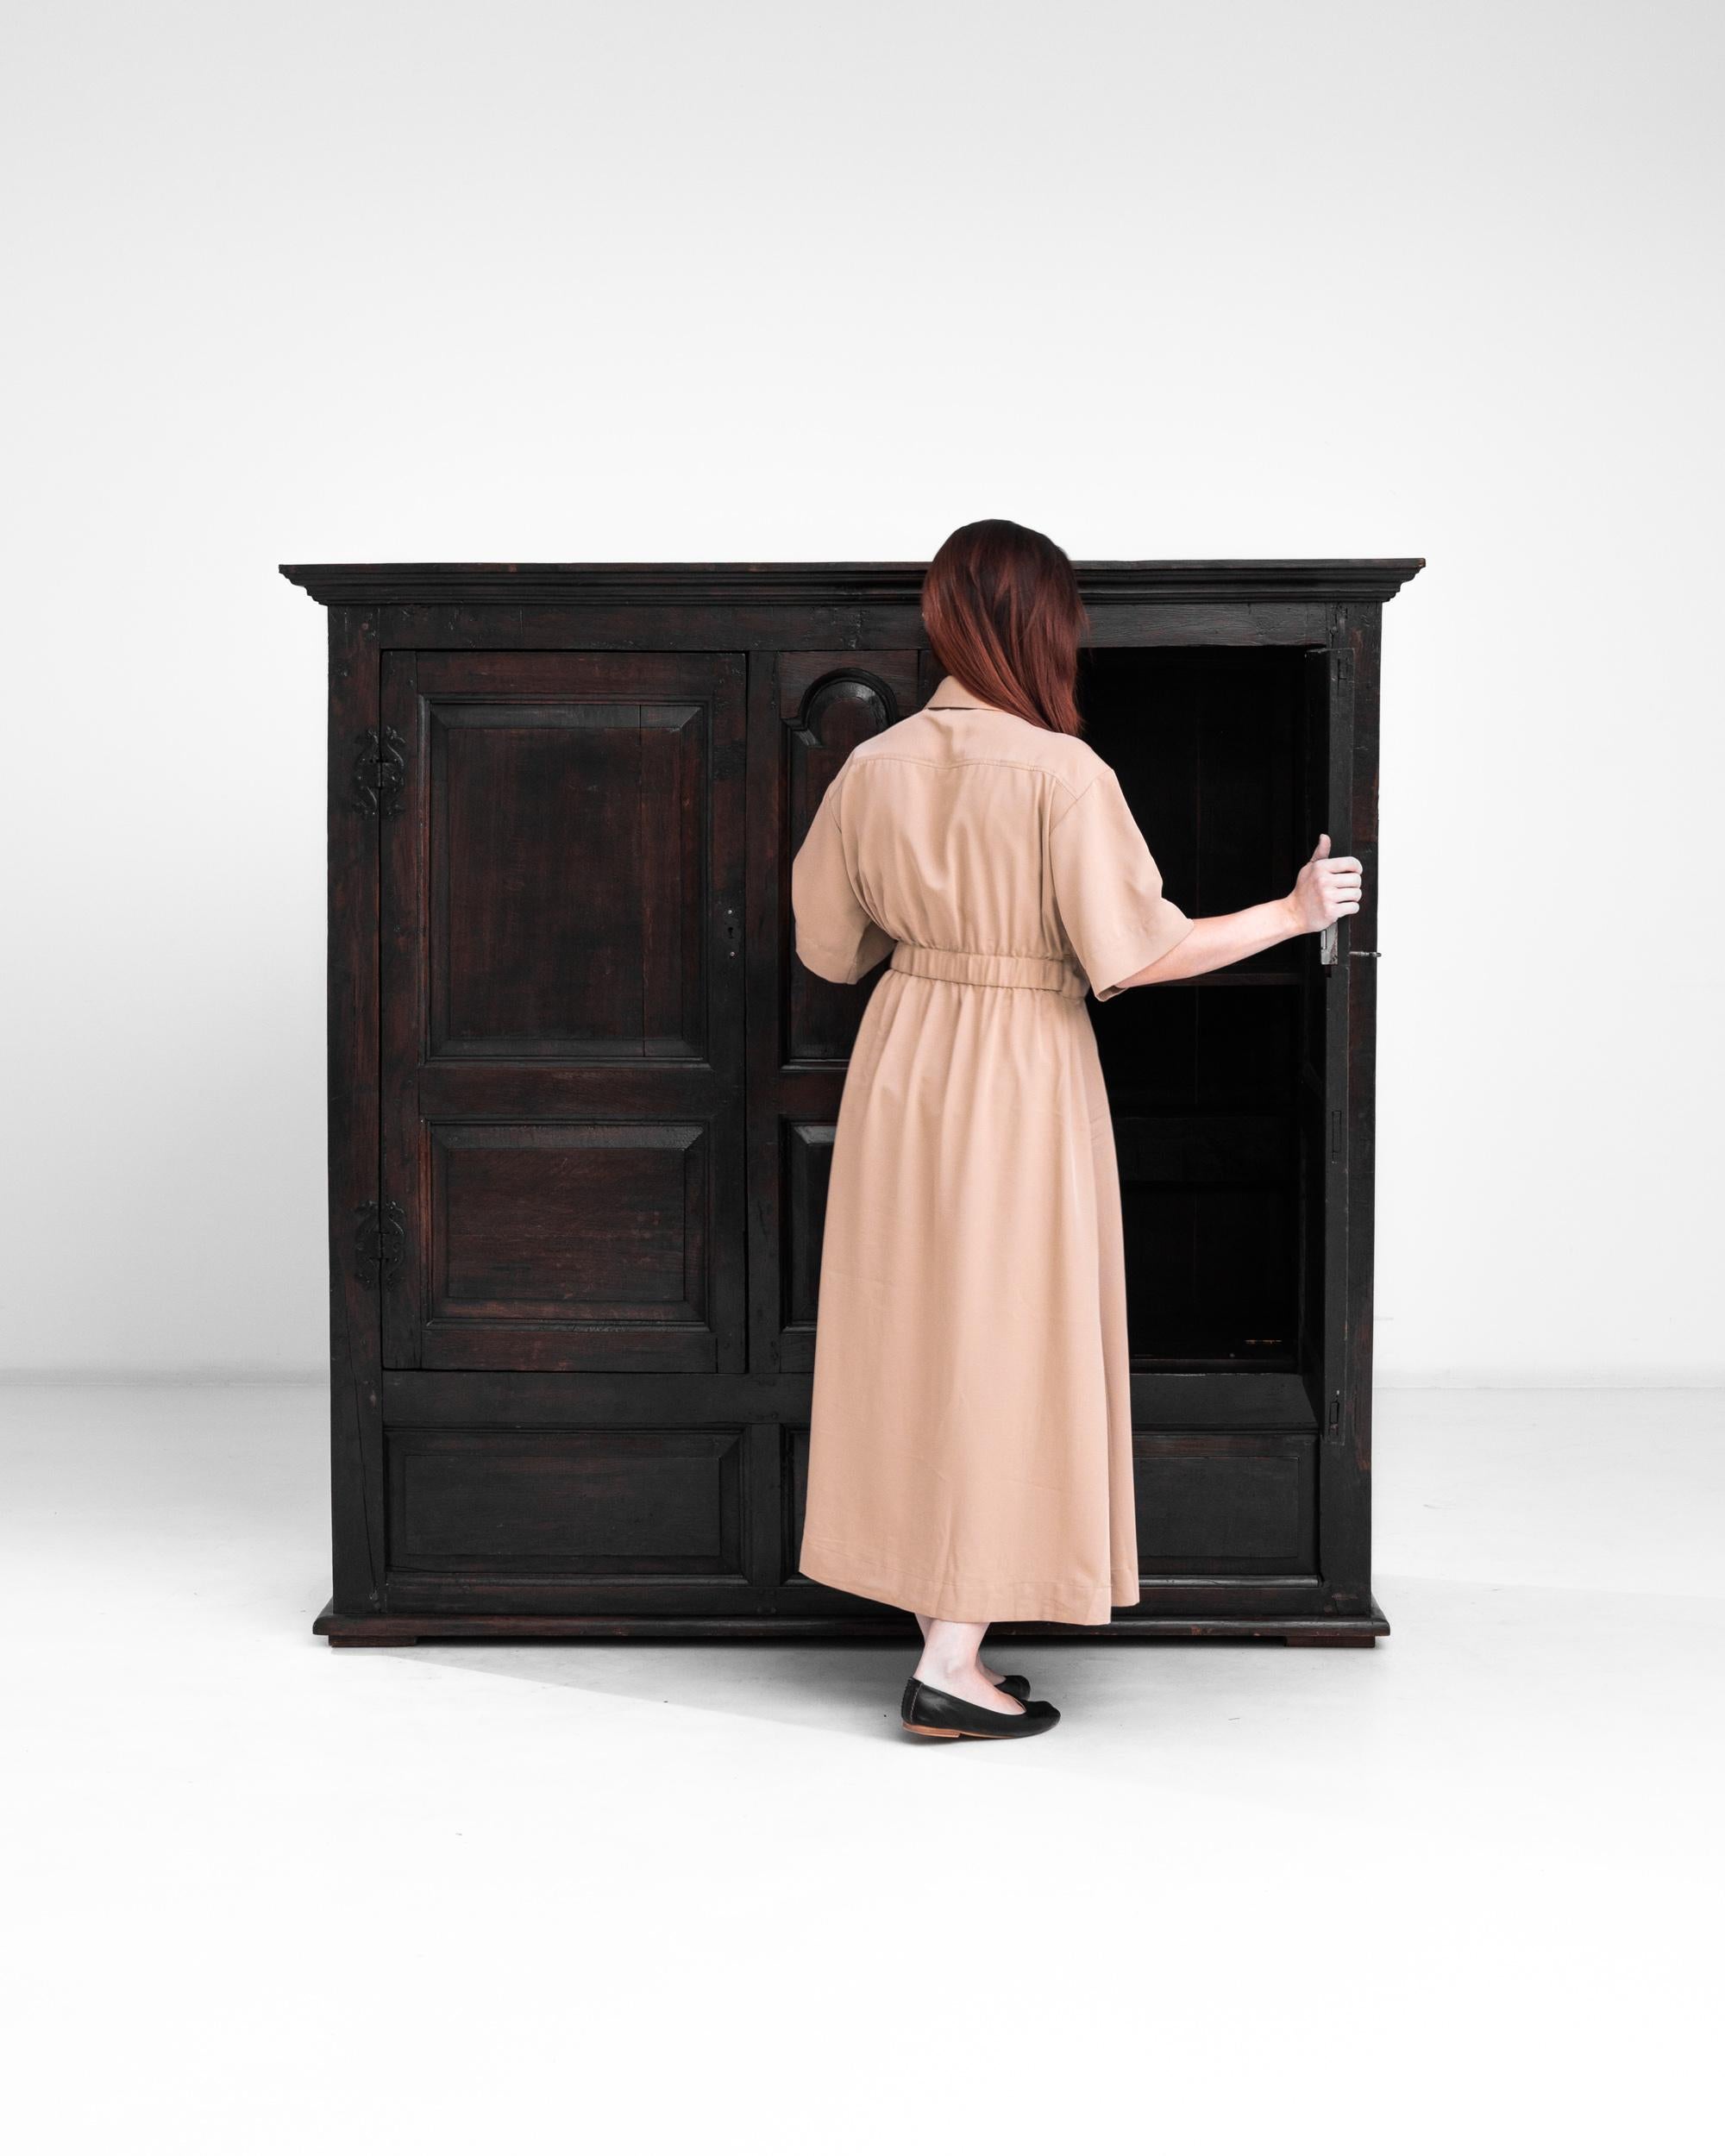 Immerse your space in the historical charm of the 1800s with the English Wooden Cabinet, proudly preserving its original patina. The dark patina, rich and nuanced, adds an authentic touch without veering into black. The cabinet features two main